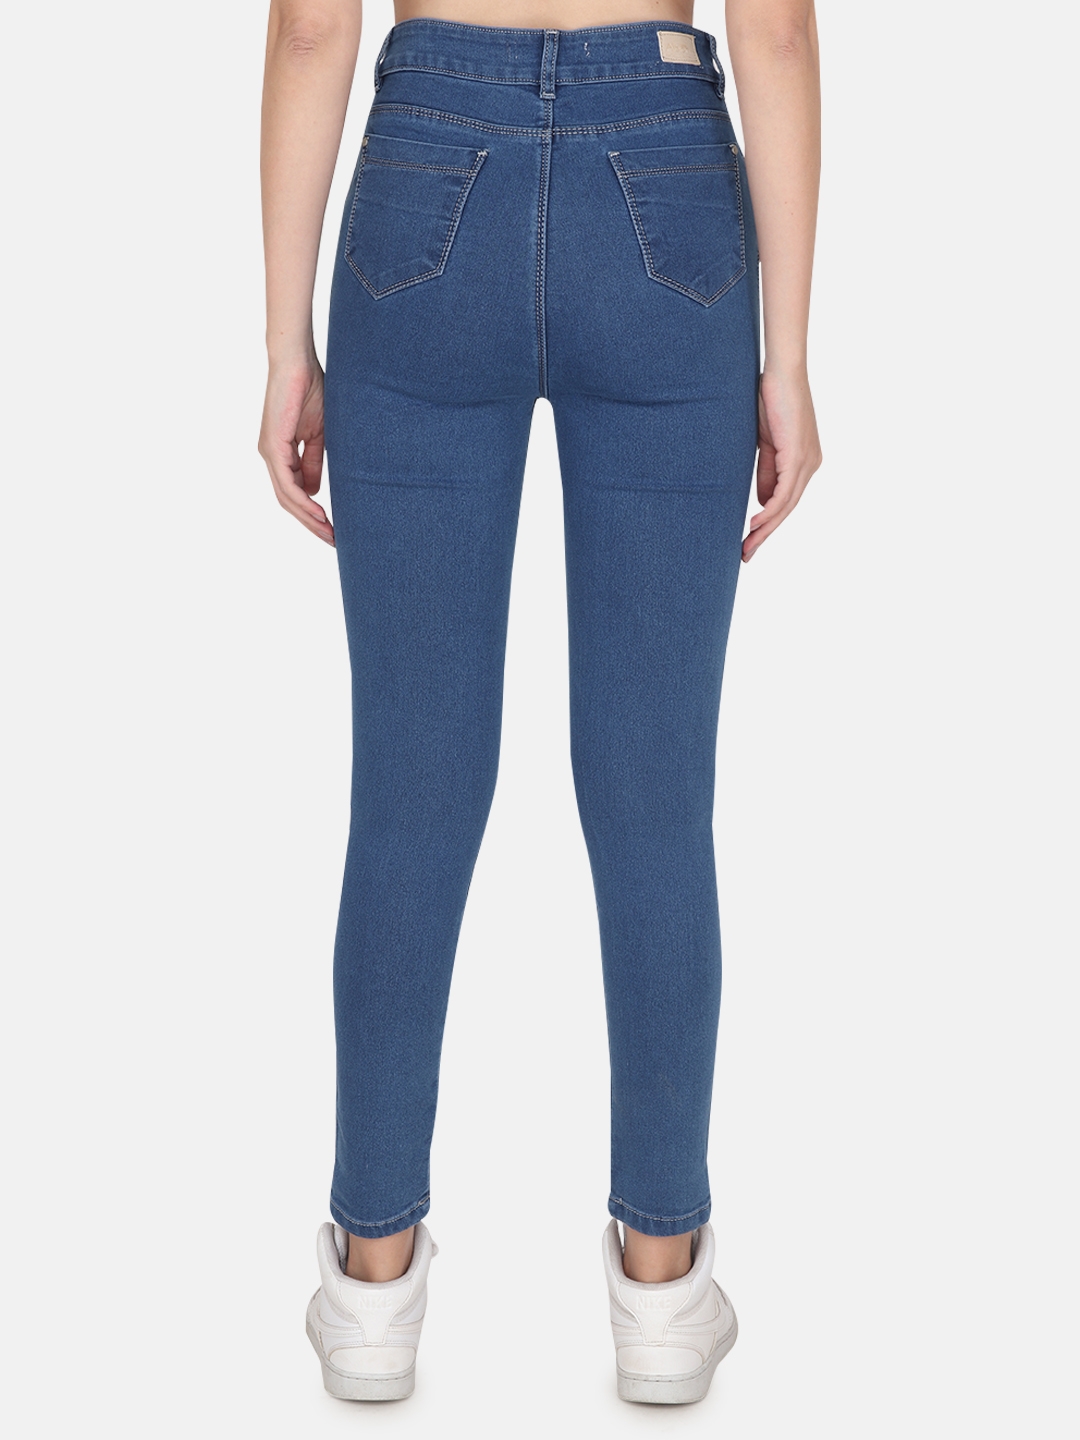 Albion | Albion By CnM Women Mid Blue Jeans 4